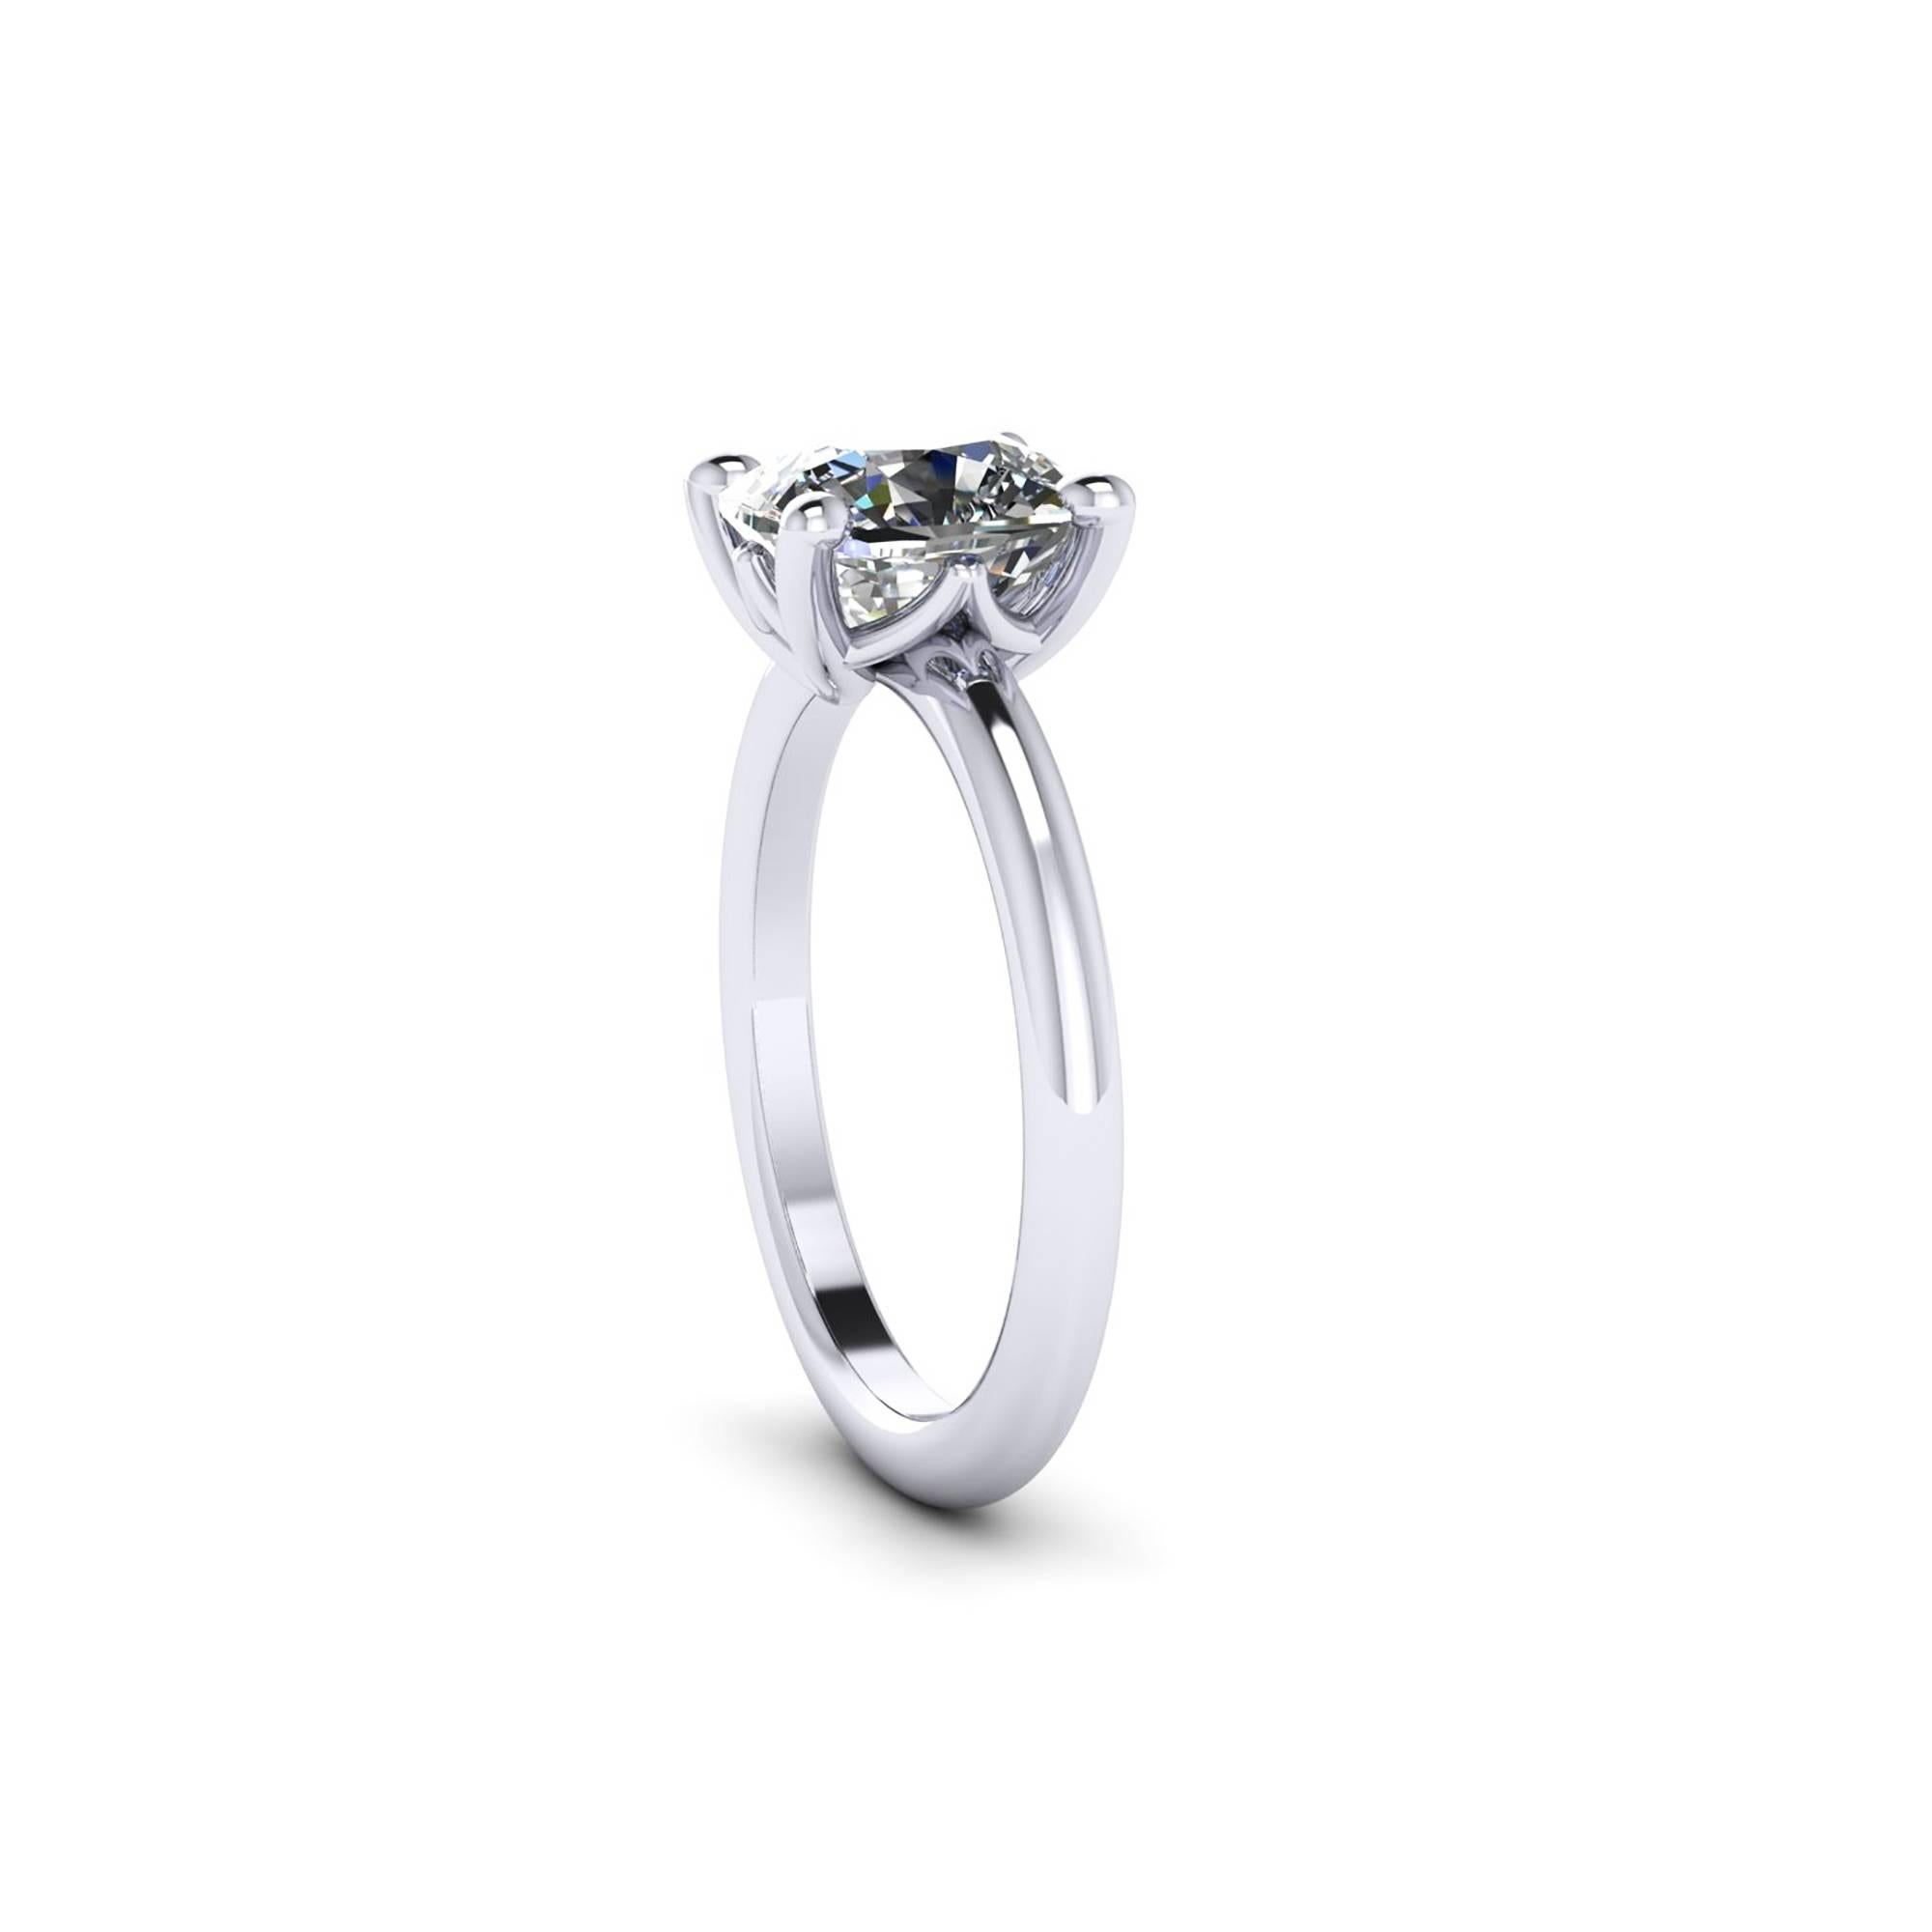 GIA Certified 2.09 Carat Cushion Cut Diamond, I color, SI2 clarity, Very Good specs solitaire engagement ring, hand made in New York City with the best Italian craftsmanship, entirely in Platinum 950
The Original GIA Certificate is available for